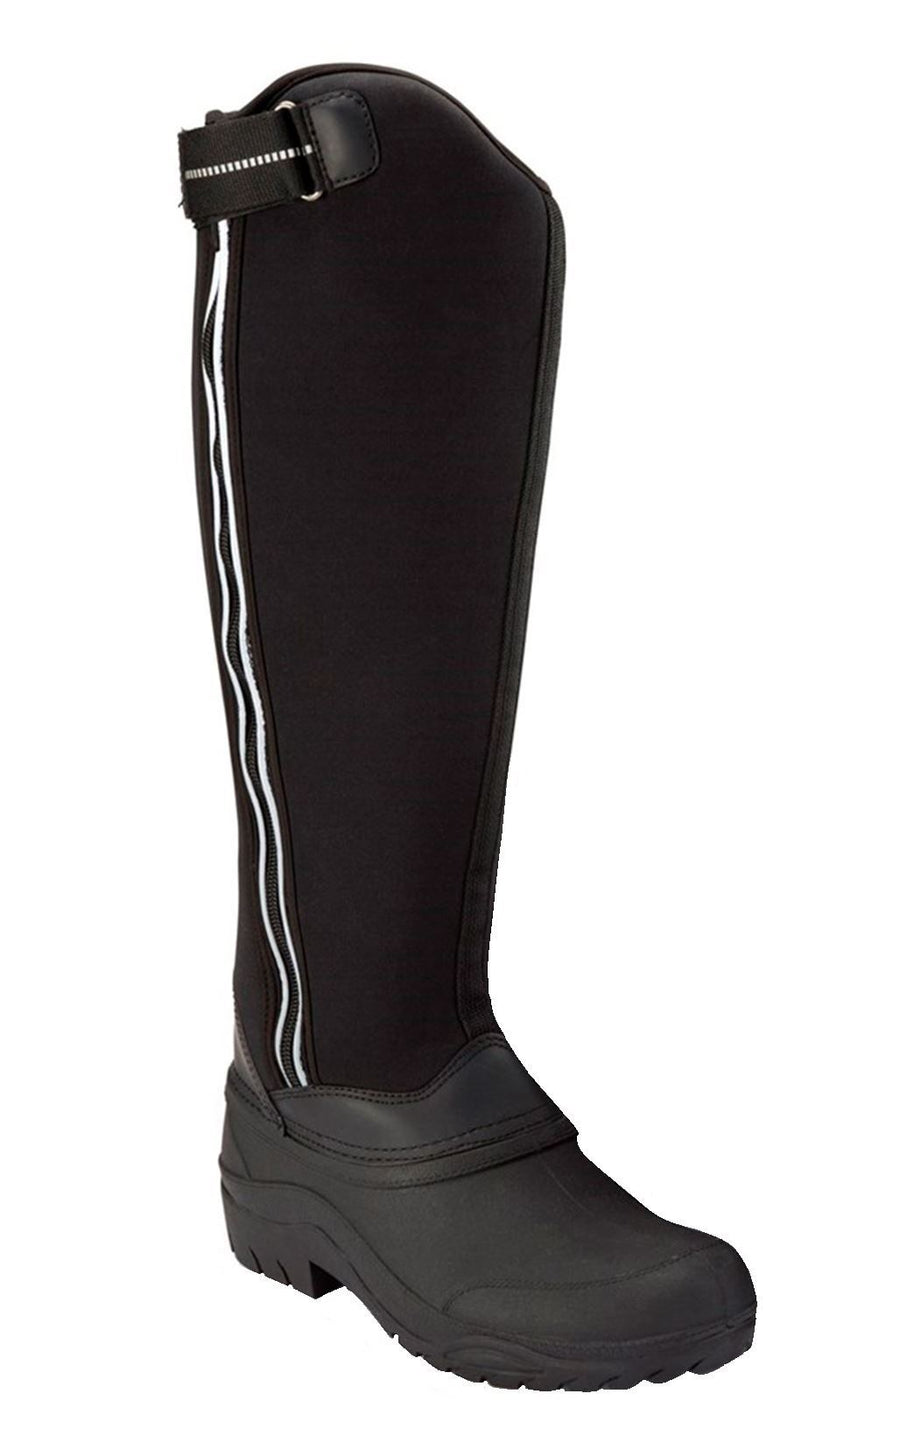 Bow and Arrow Neo Vis Boots Black